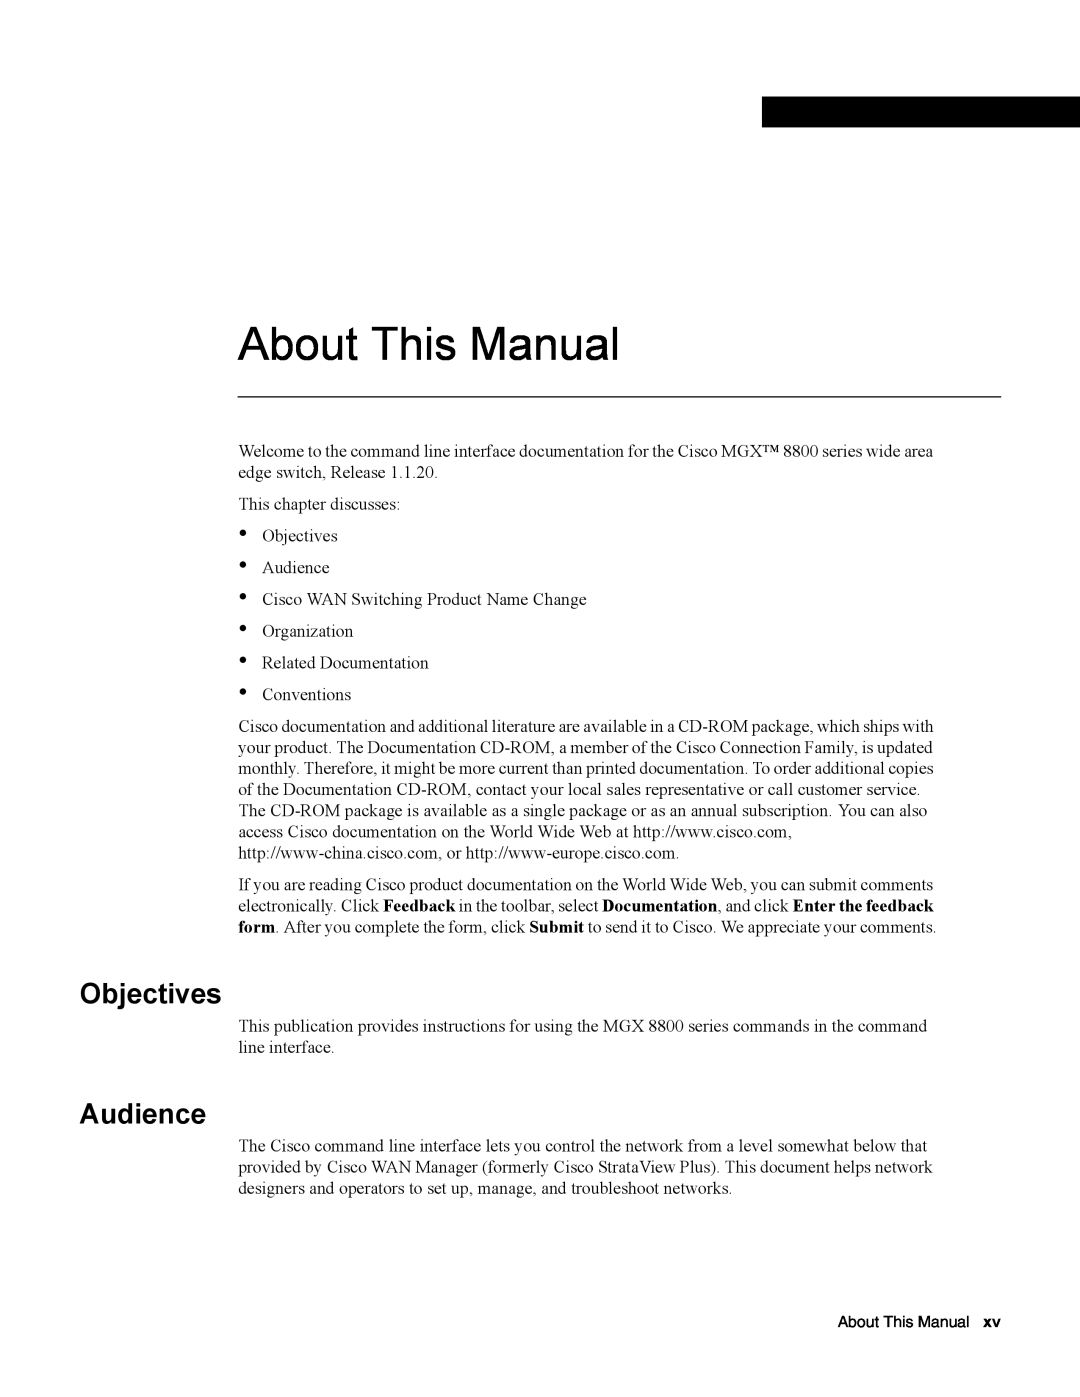 Cisco Systems MGXTM 8800 manual Objectives, Audience, About This Manual 